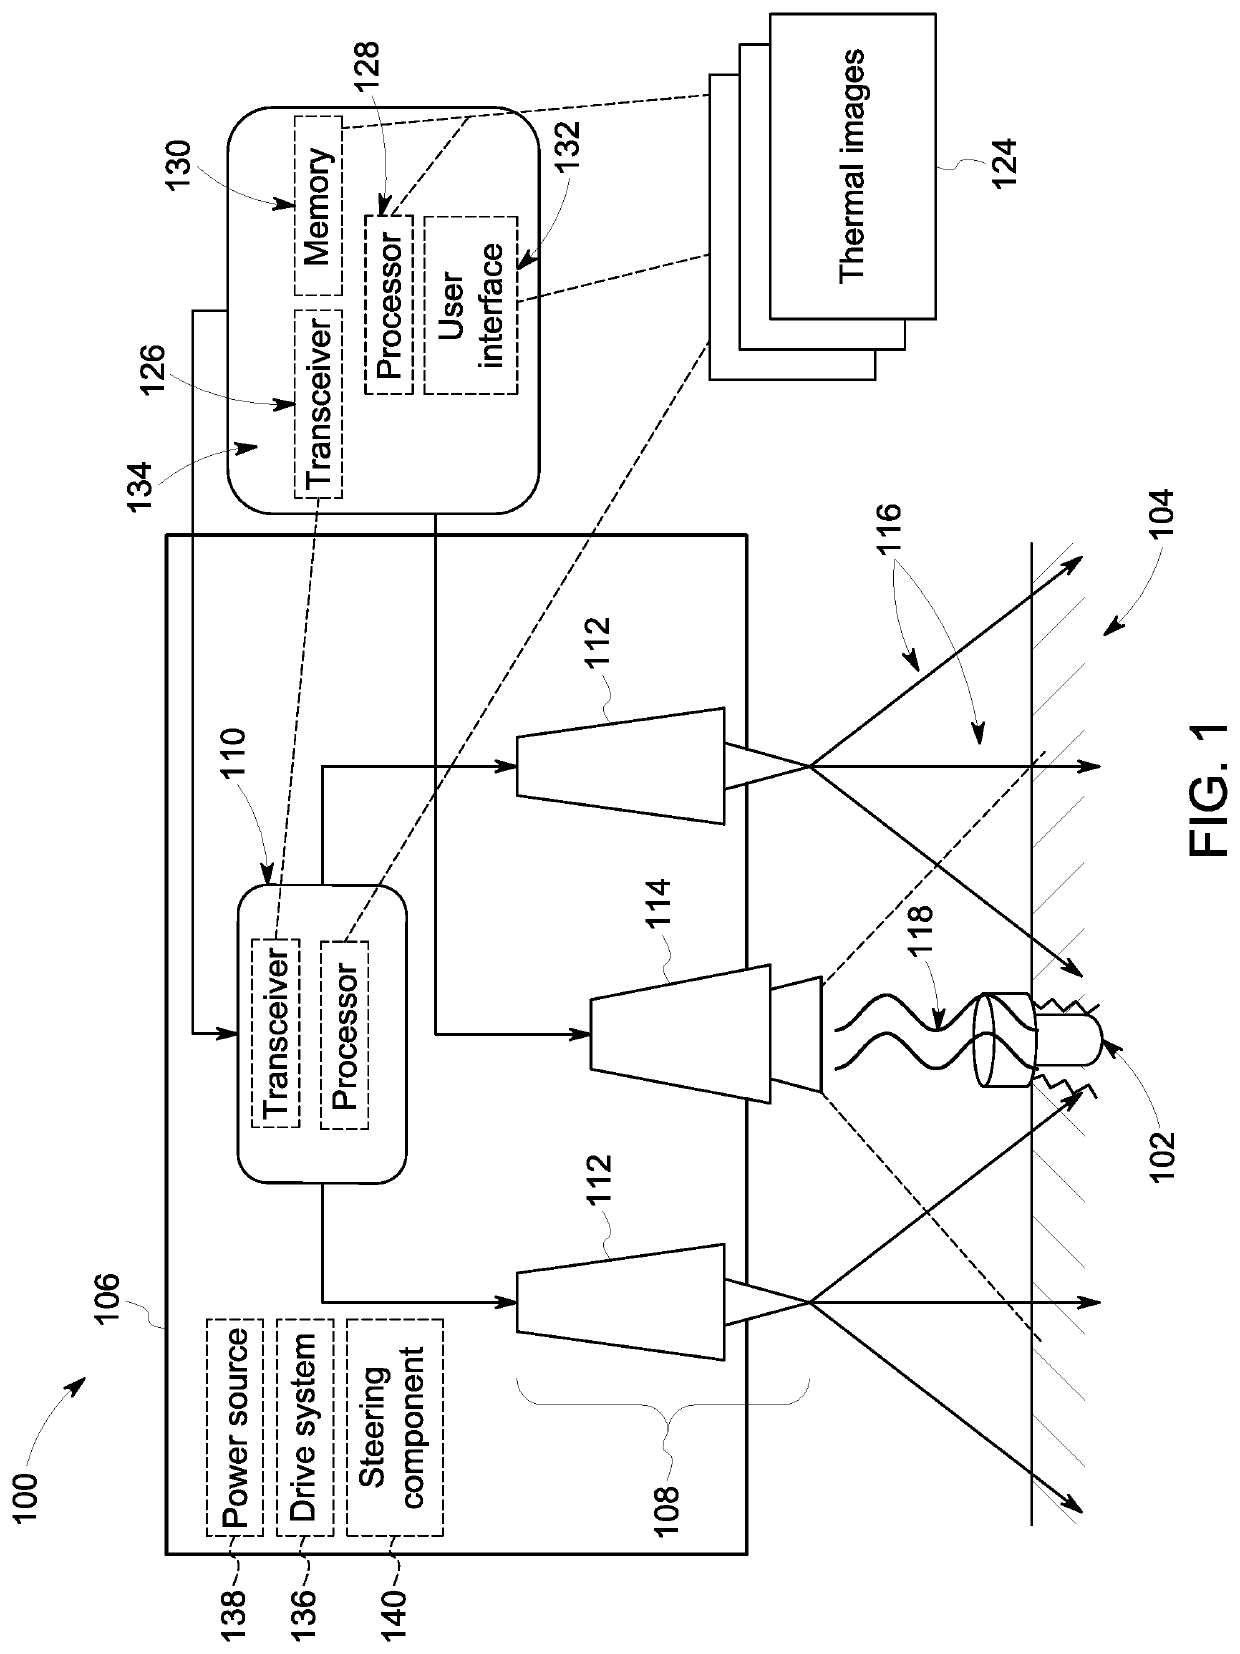 Thermographic inspection system mounted on motorized apparatus and methods of using same